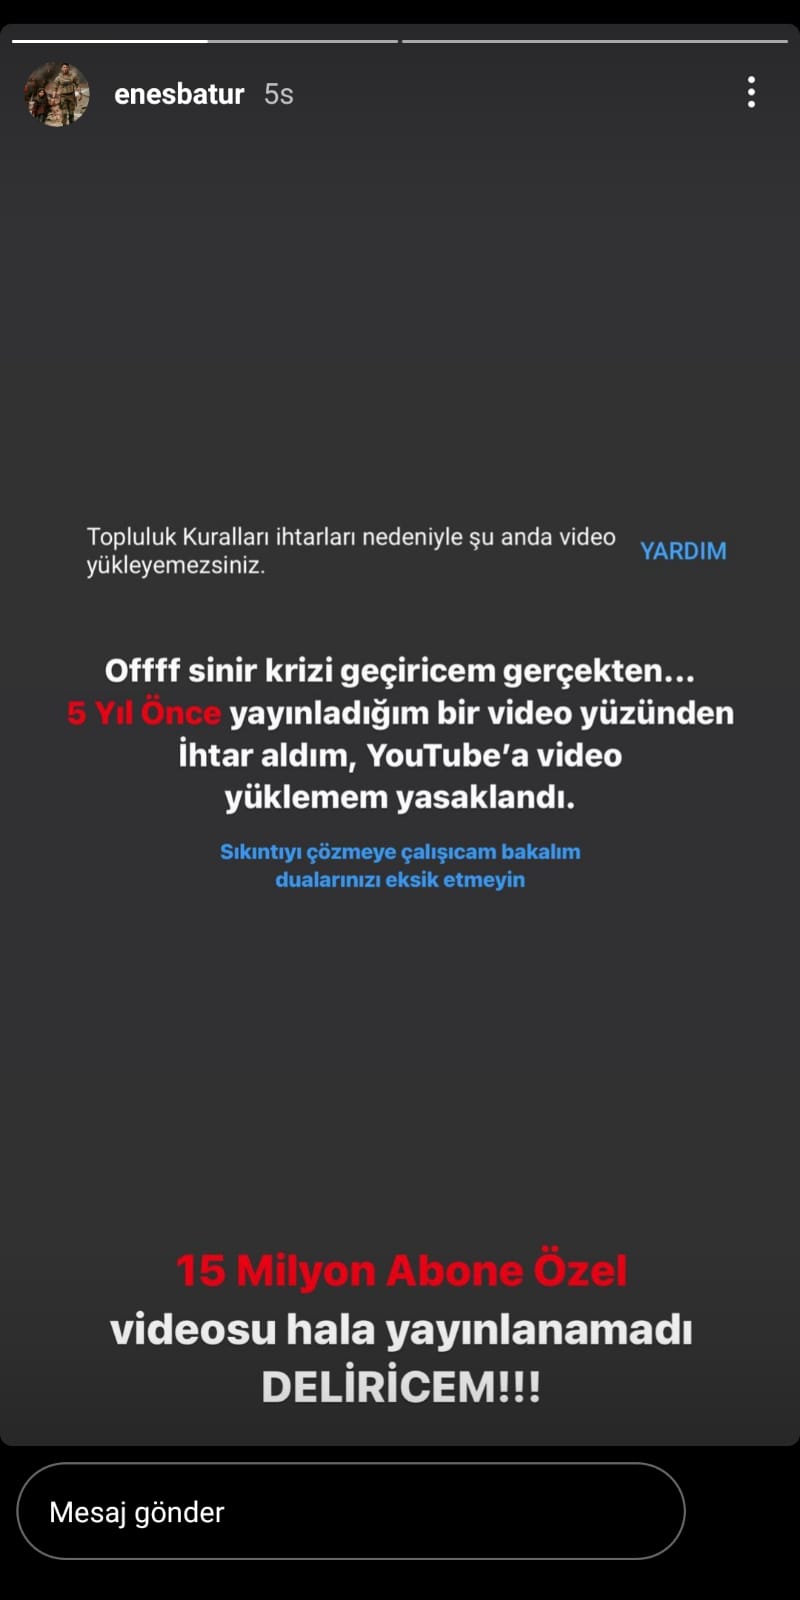 enes batur will not be able to upload